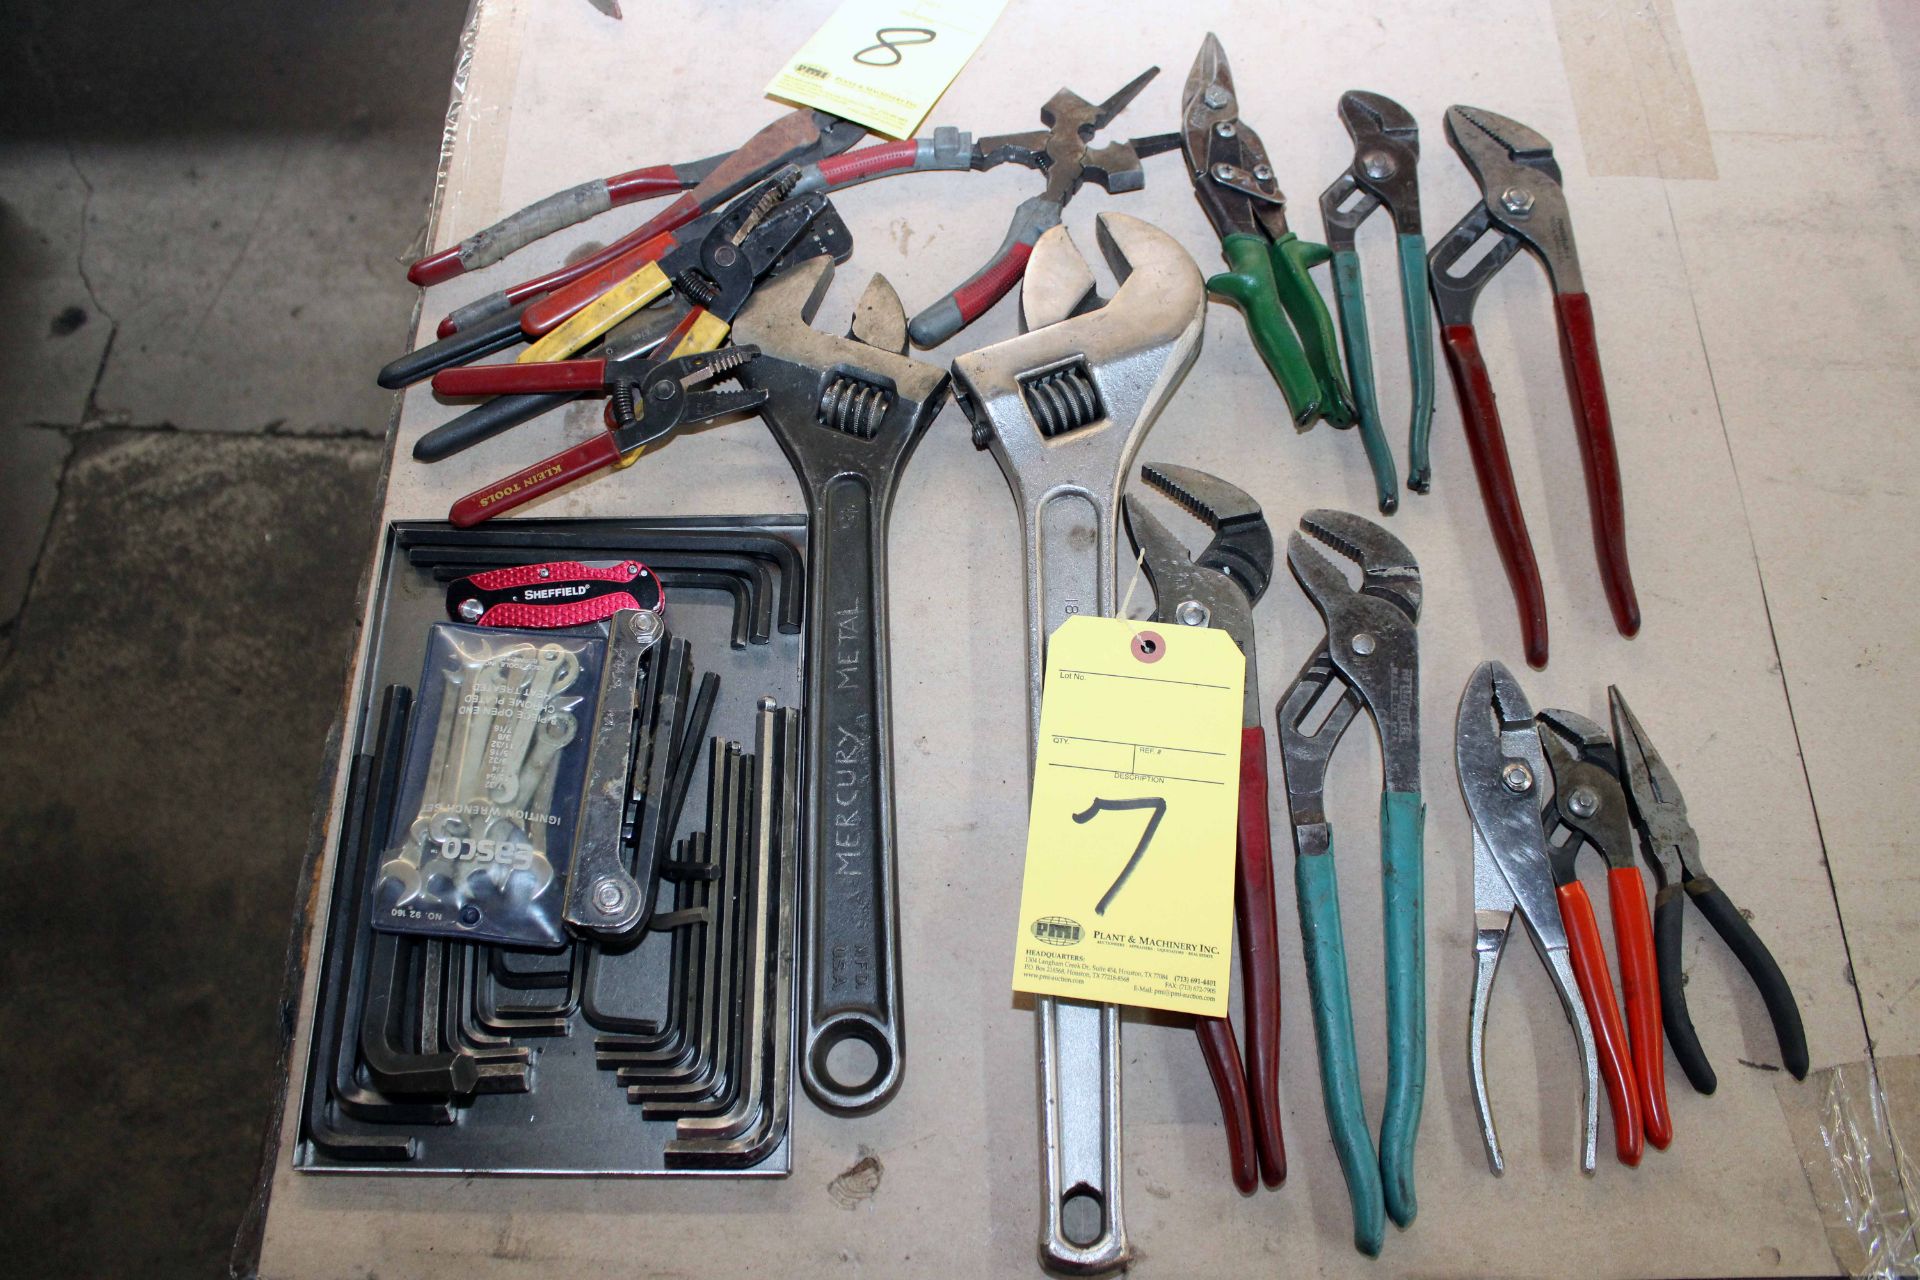 LOT CONSISTING OF: crescent wrenches, pliers, wire strippers, Allen wrenches